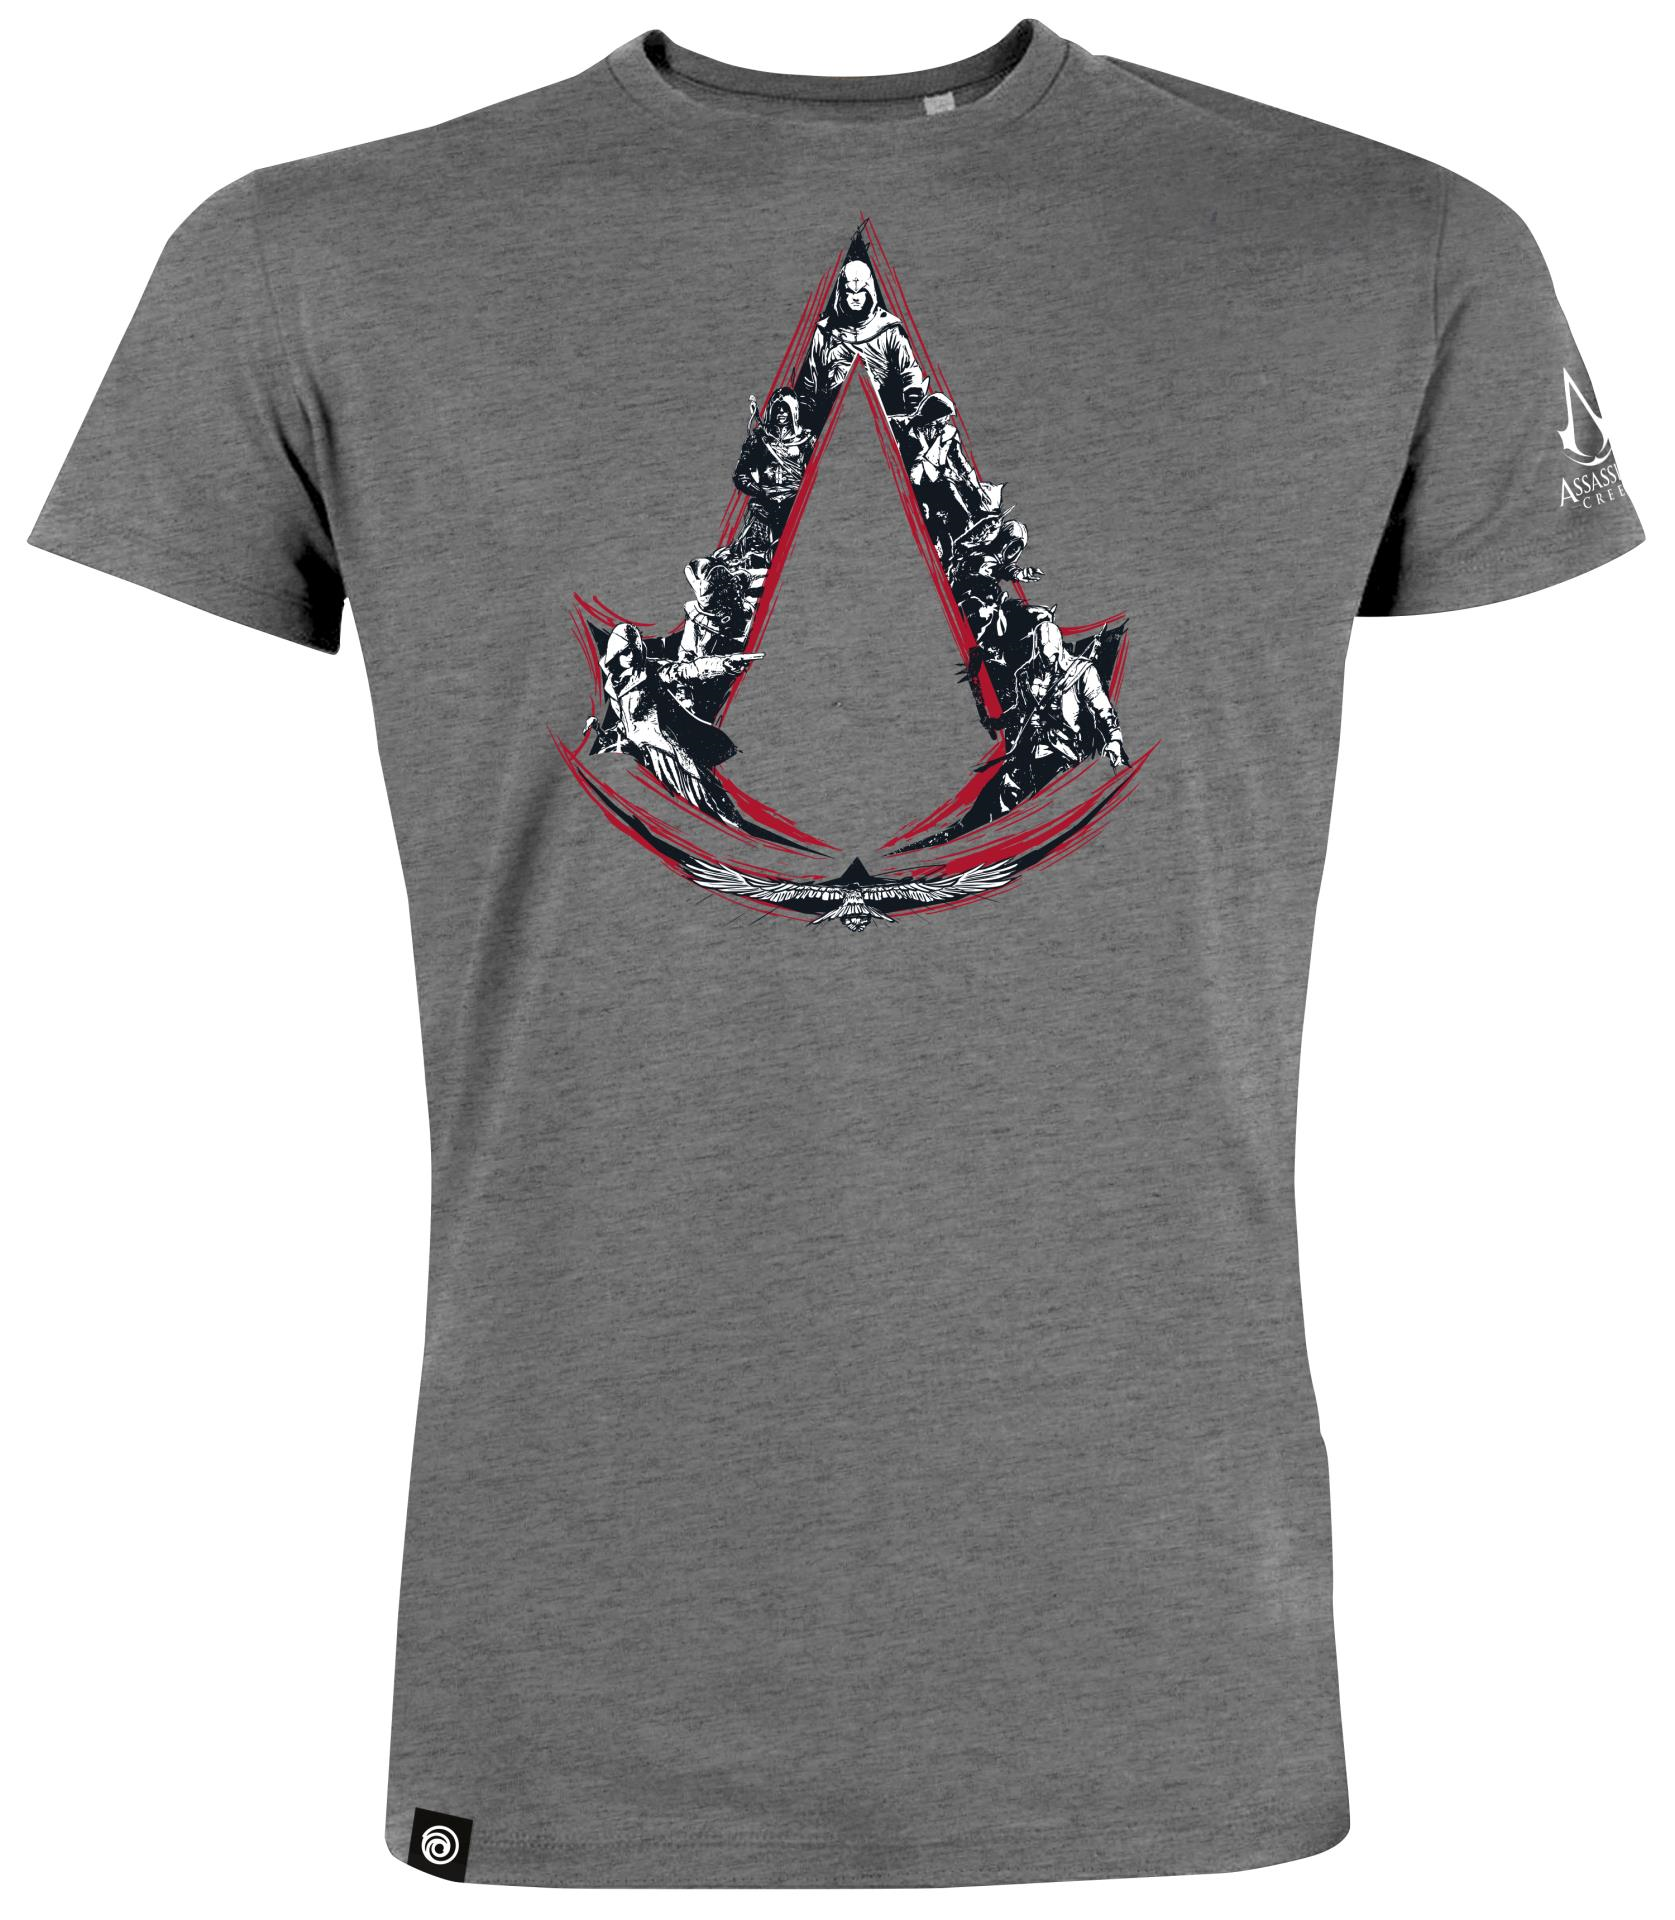 Assassin\'s Creed - Ubisoft Consumer Show 2019 T-Shirt - S